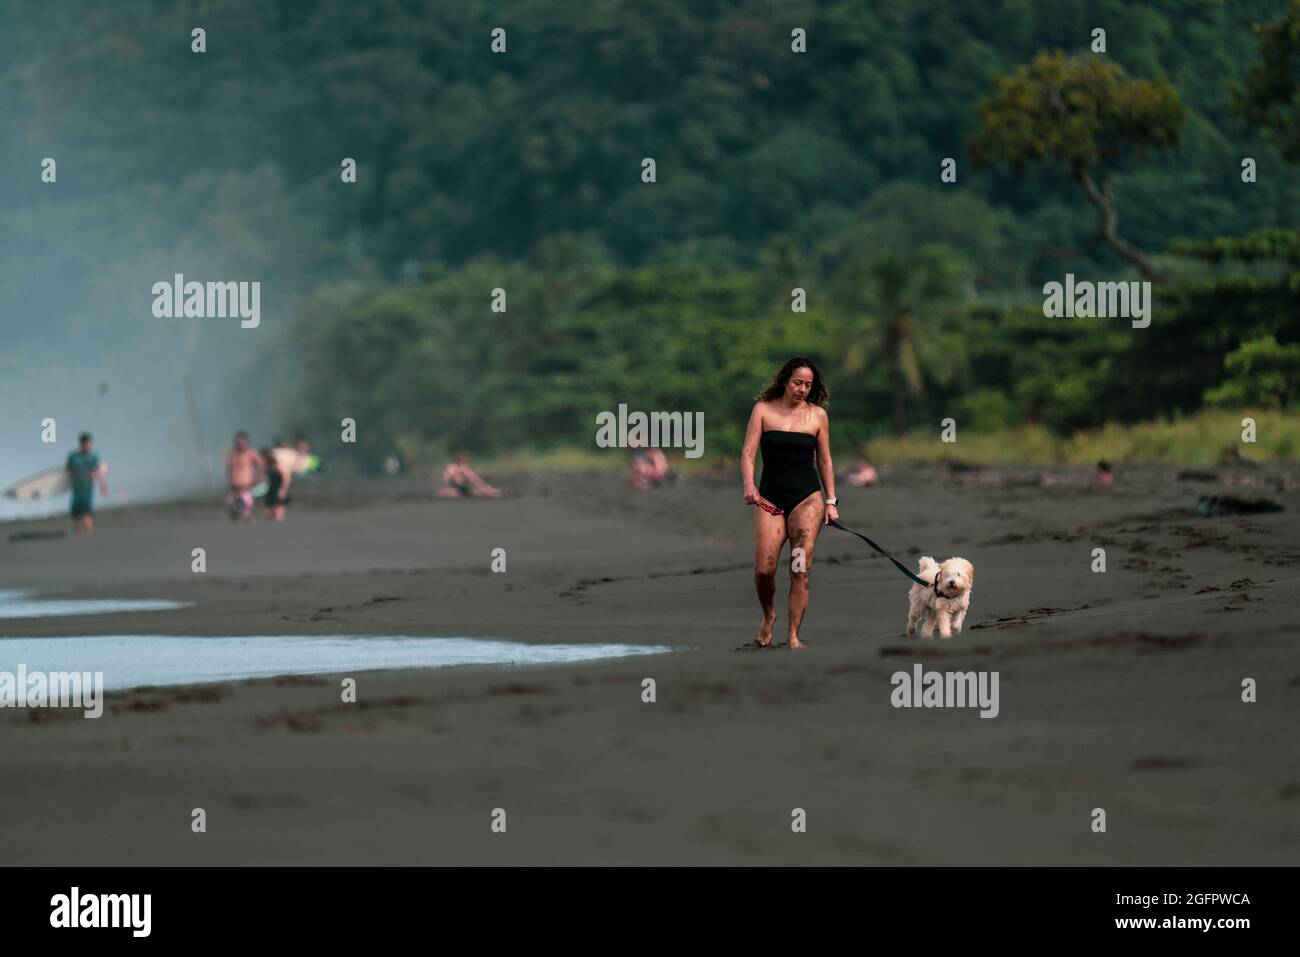 Playa Hermosa, Guanacaste, Costa Rica - 07.26.2020: A beautiful woman is walking her dog at teh Pacific Coast of Costa Rica Stock Photo